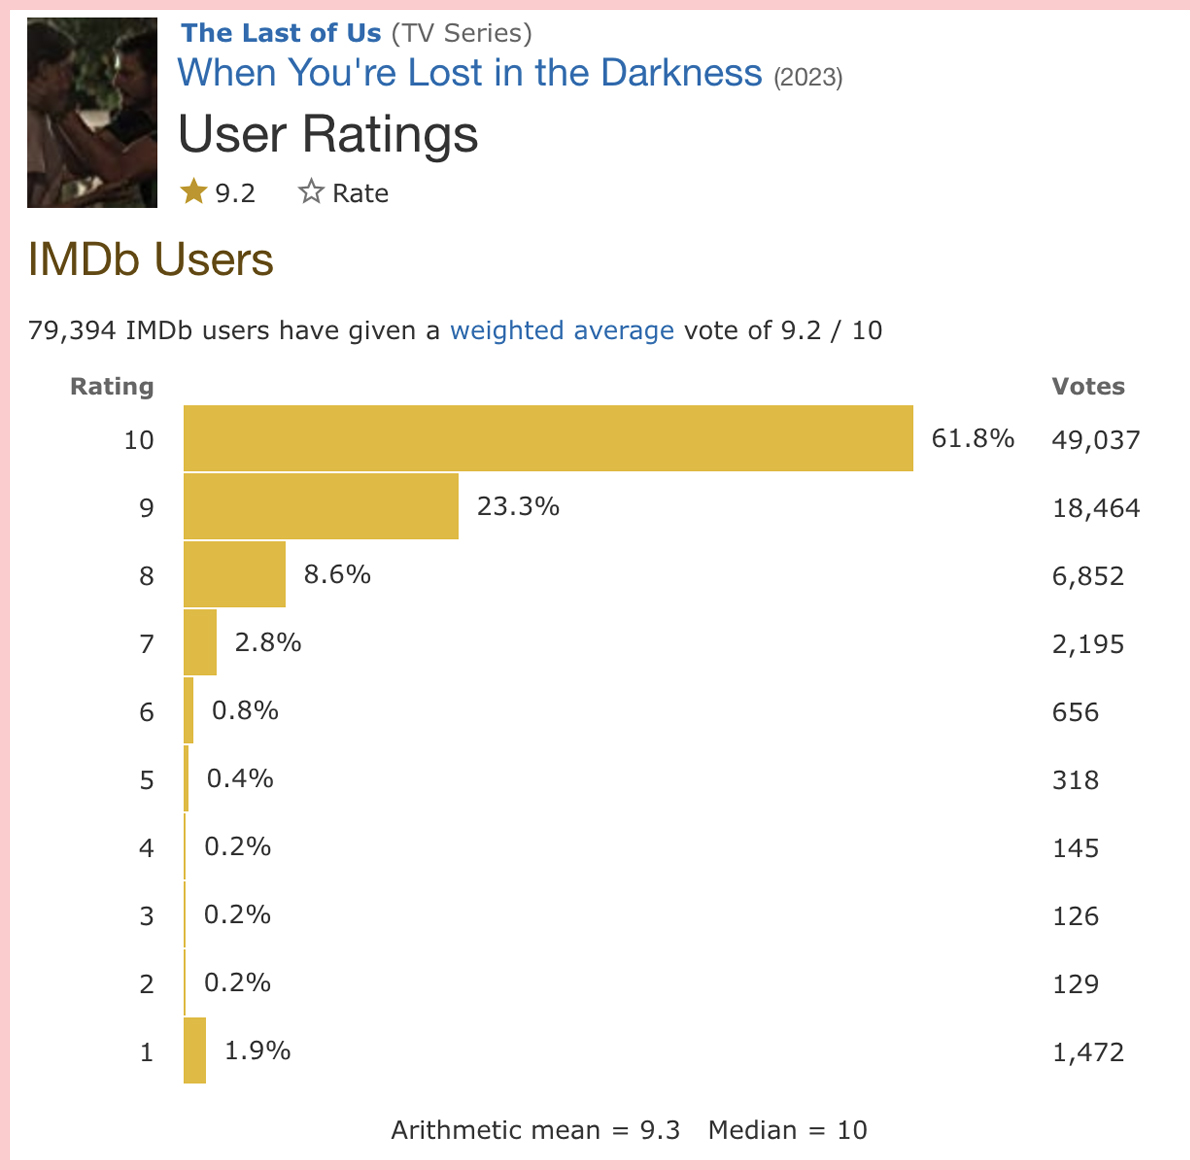 The two Last of Us episodes rated lowest on ImdB have something in common